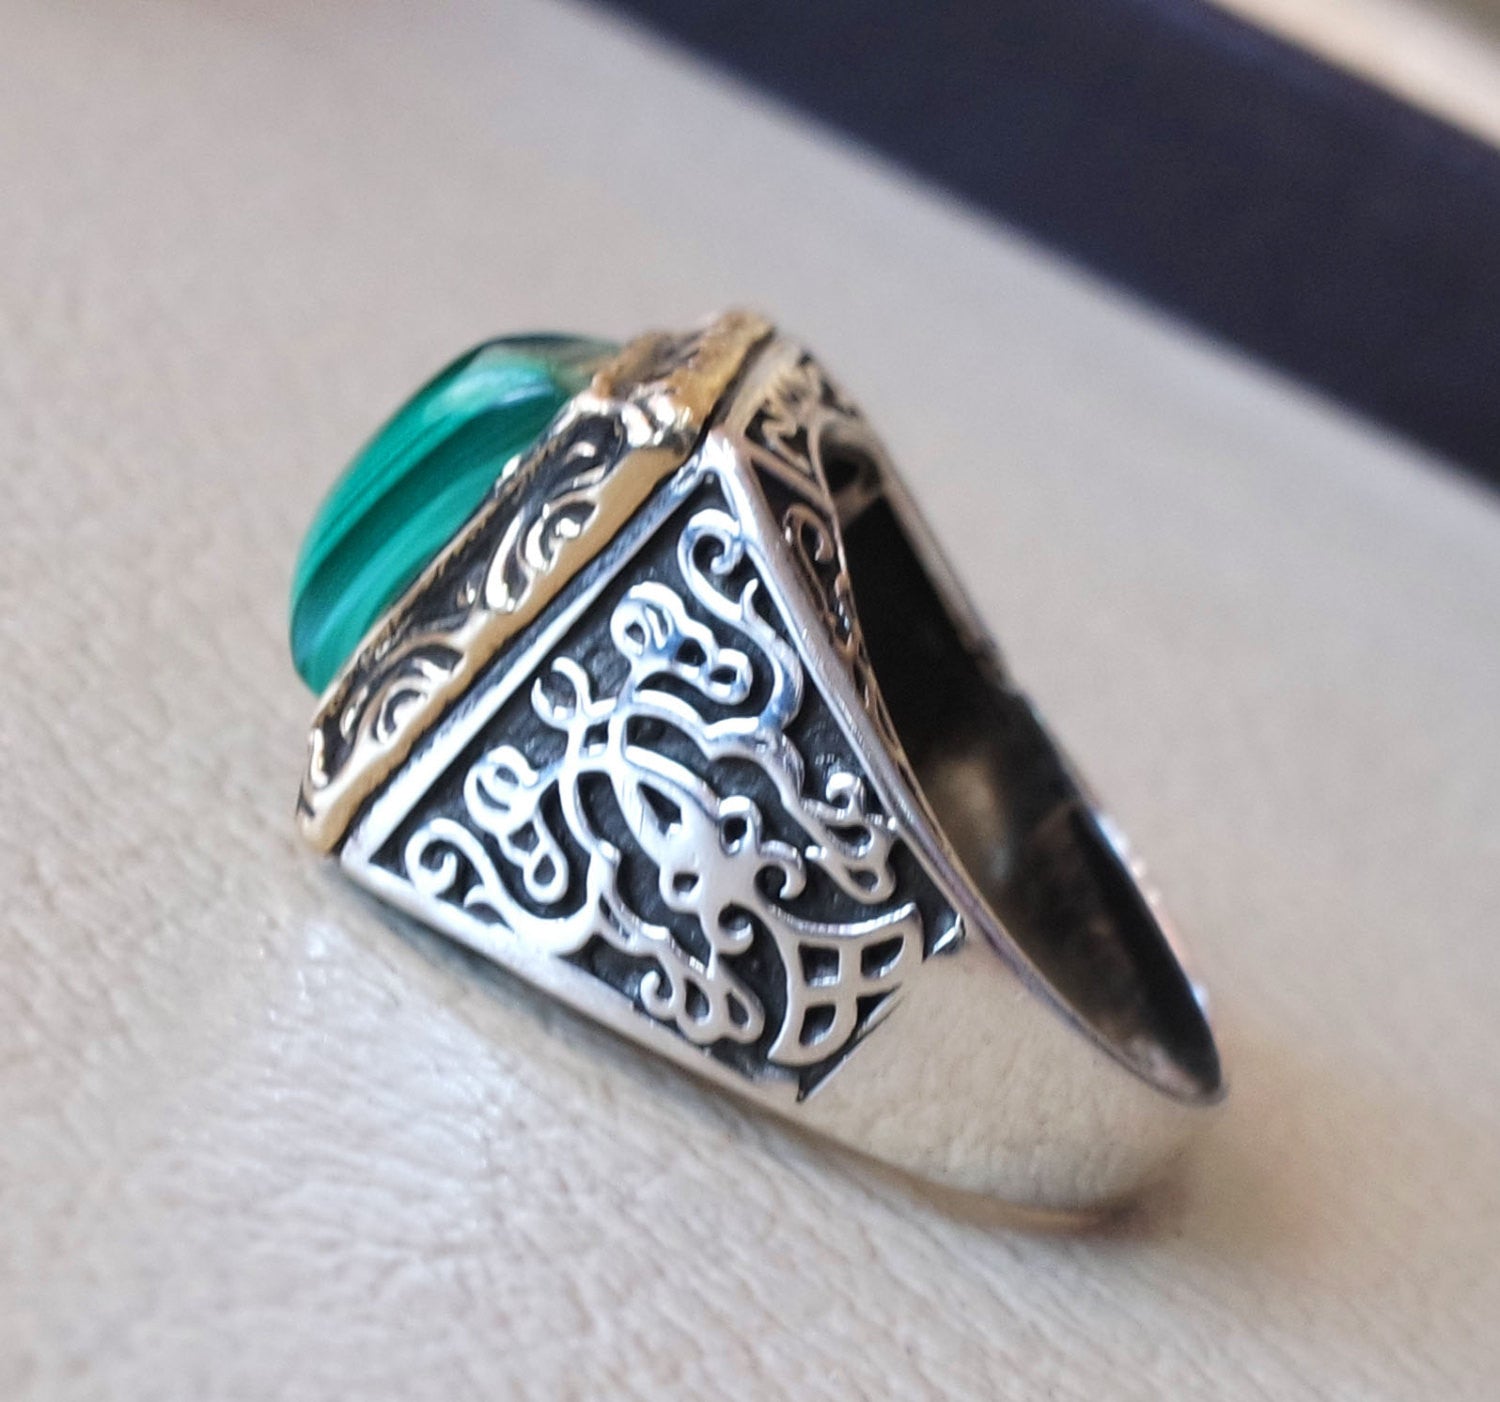 square natural malachite high quality green stone heavy sterling silver 925 man ring bronze frame any size ottoman style jewelry